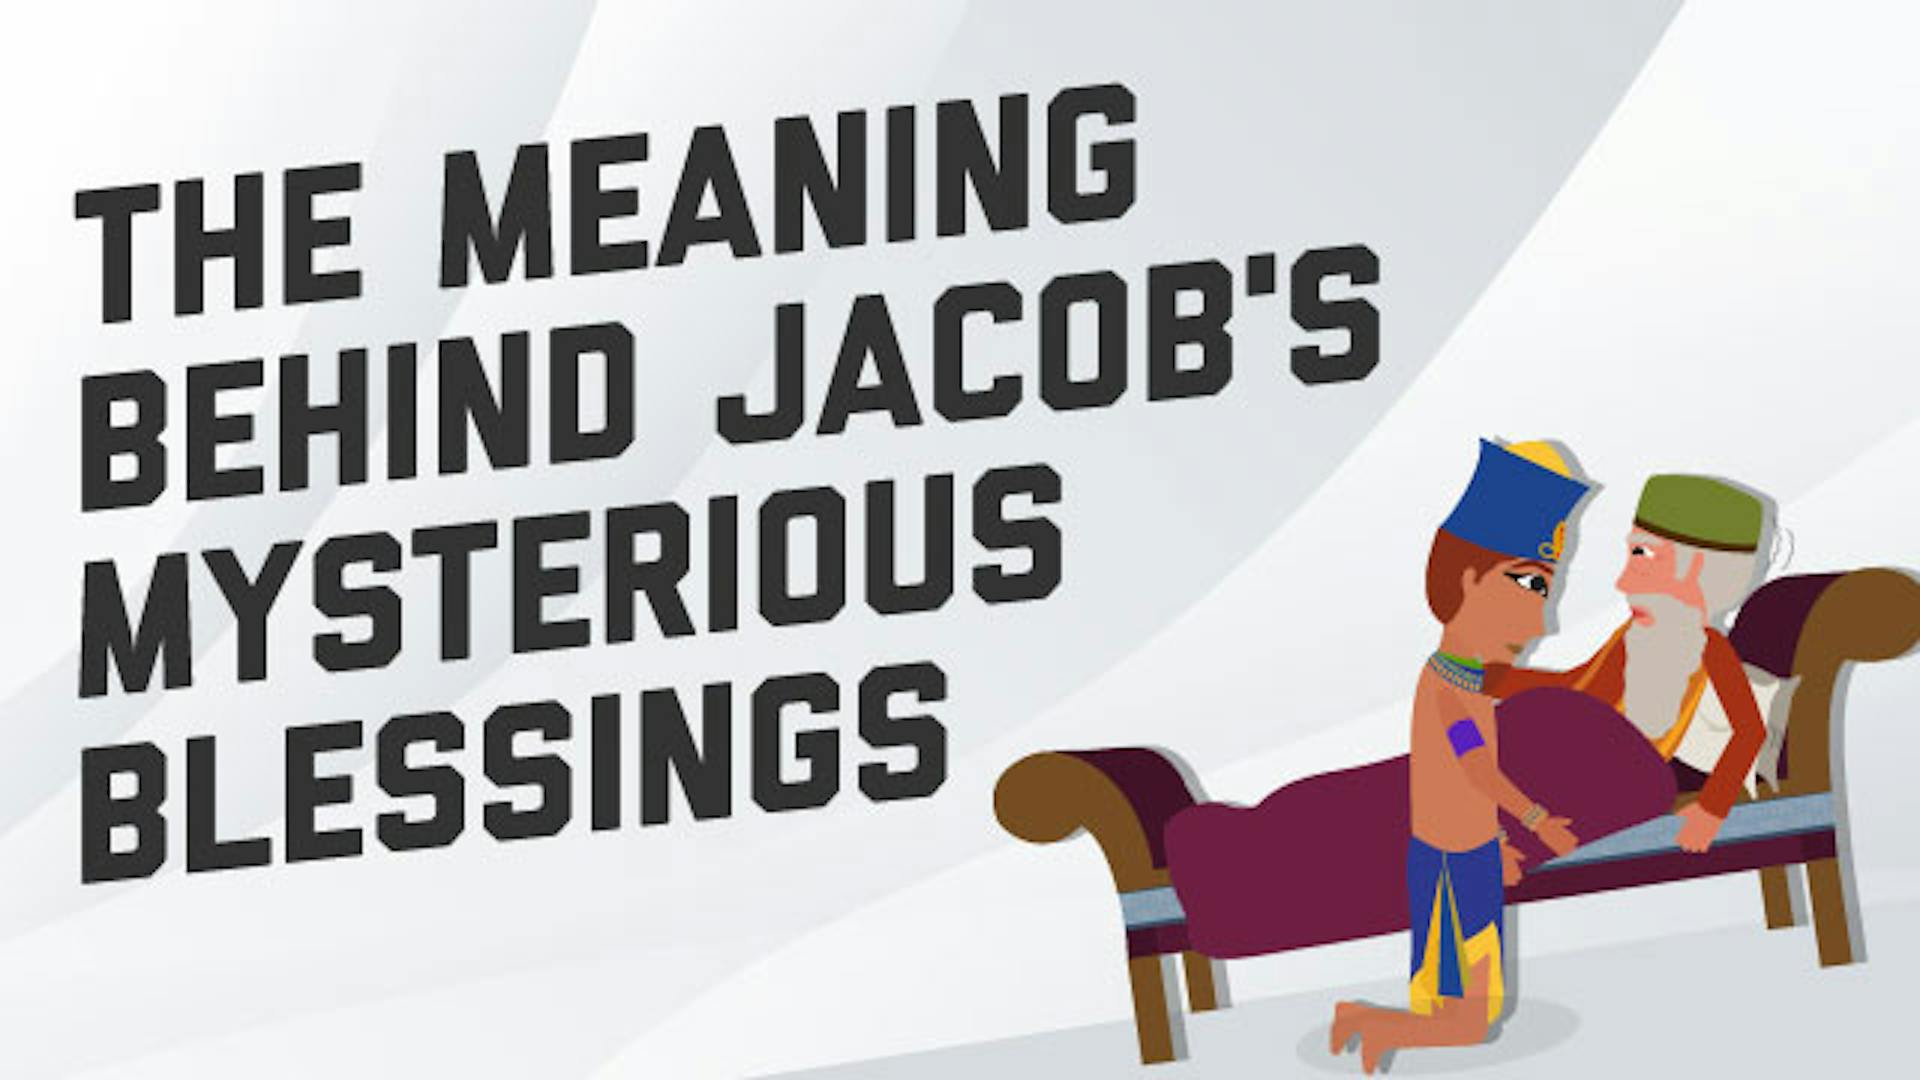 What was Joseph's blessing from Jacob